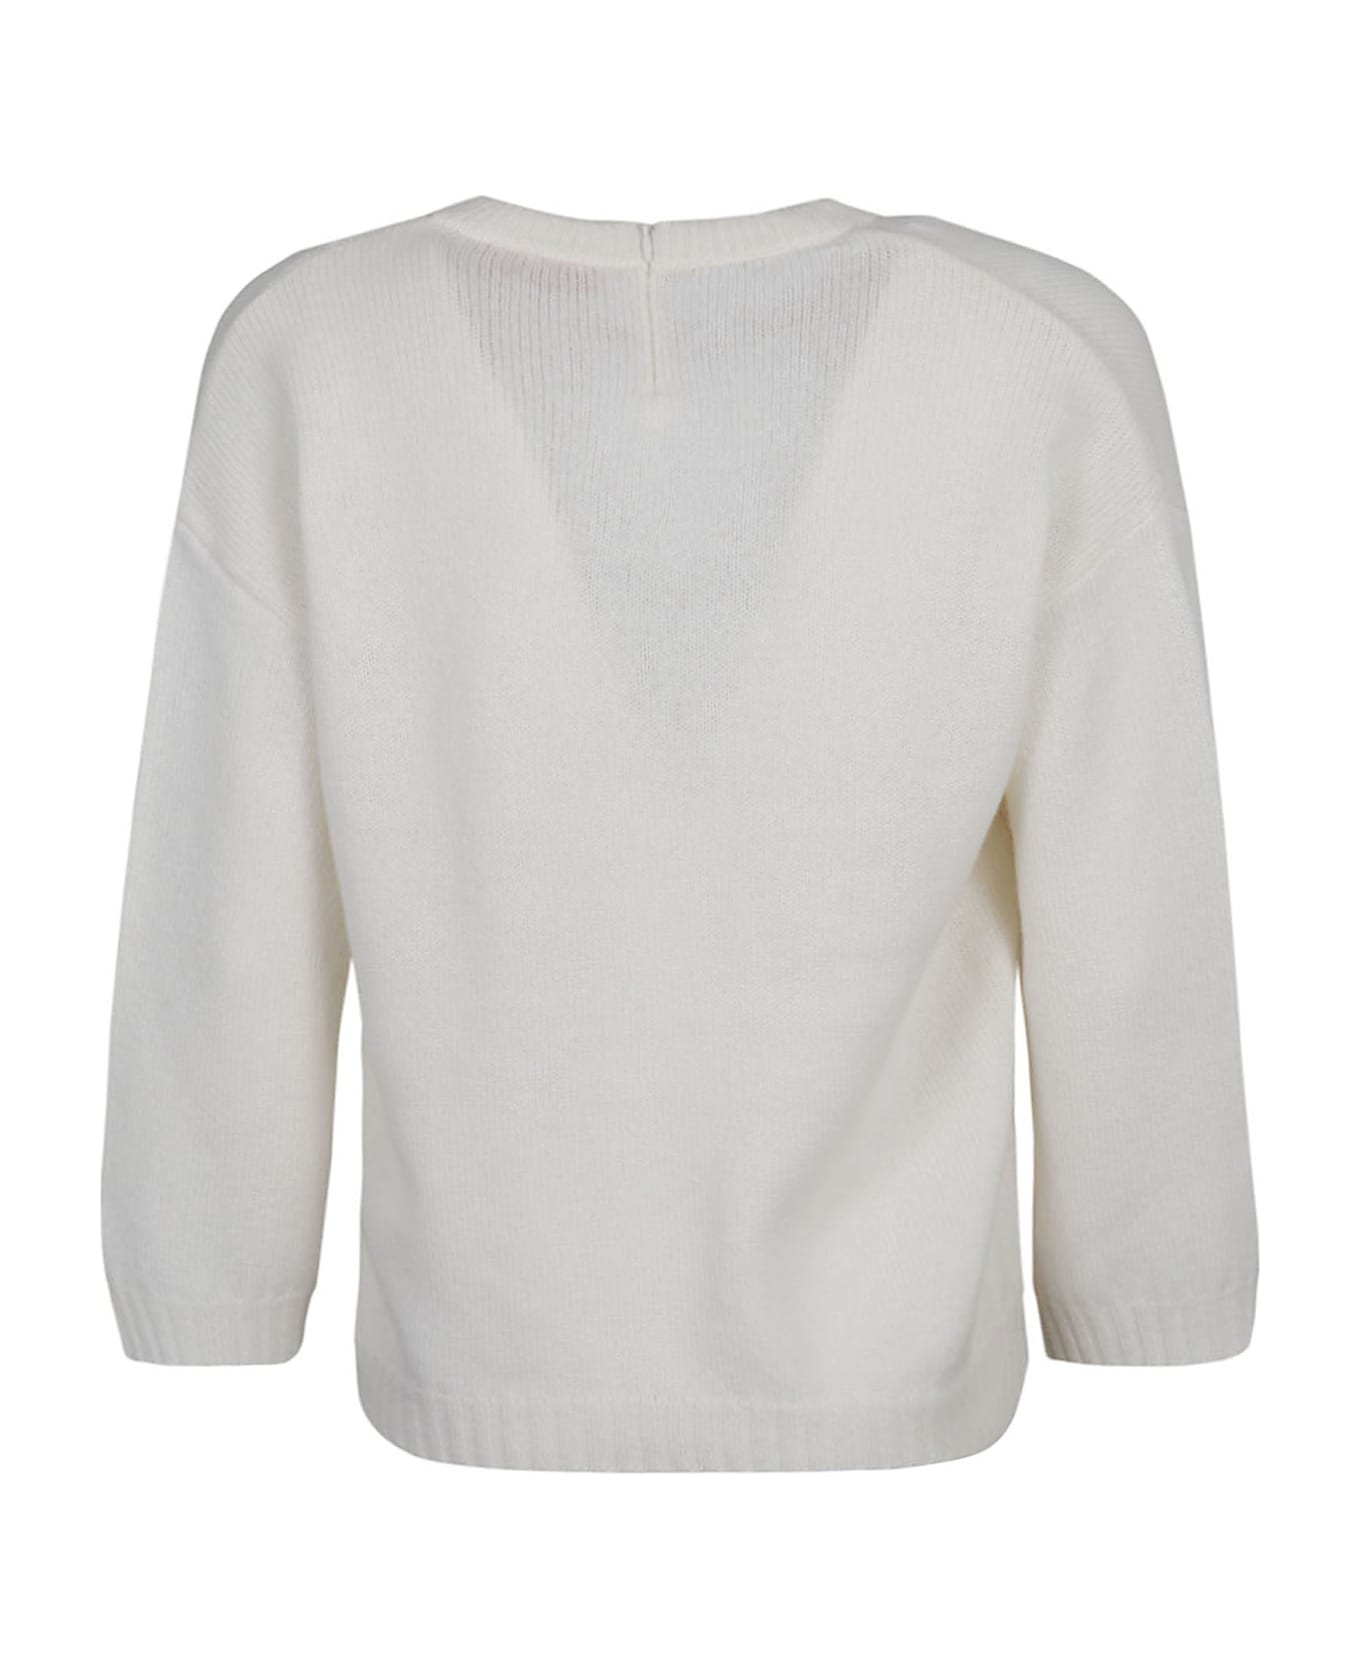 Valentino Cropped Knitted Jumper - Ivory